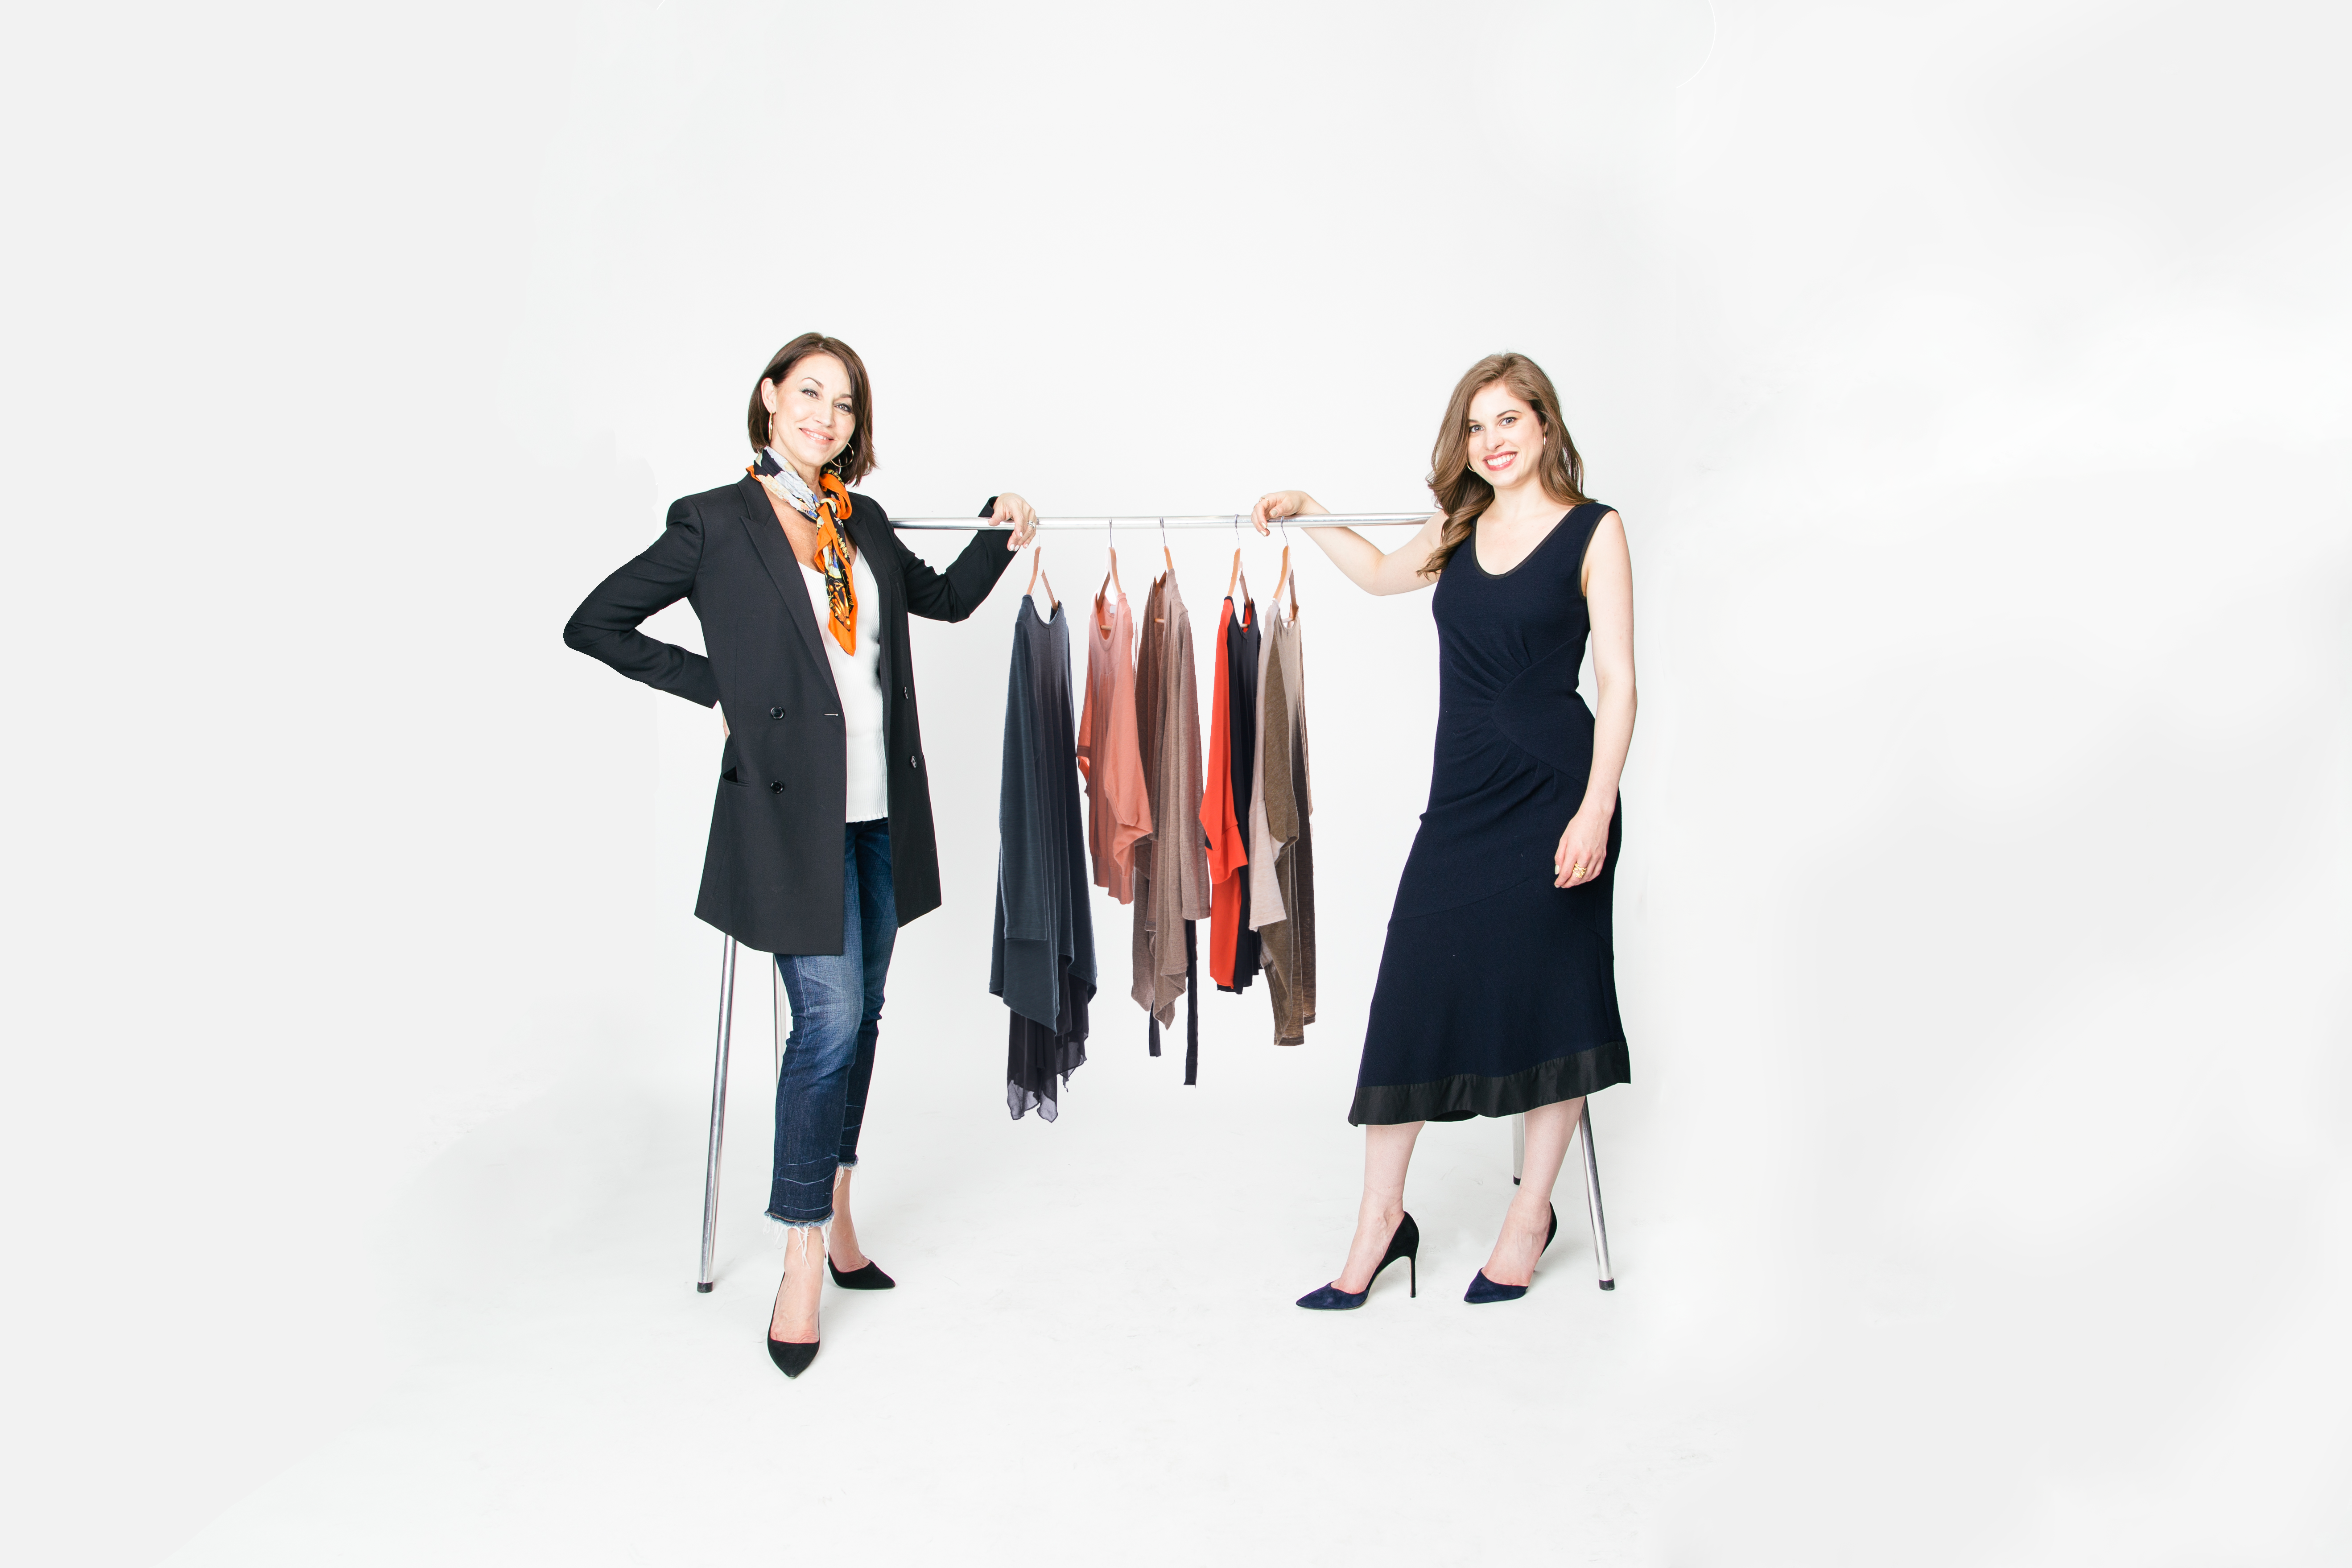 Two white women with brown hair standing in front of a rack of clothing. One wears a navy dress with heels and the other wears a black blazer, white camisole, jeans and heels